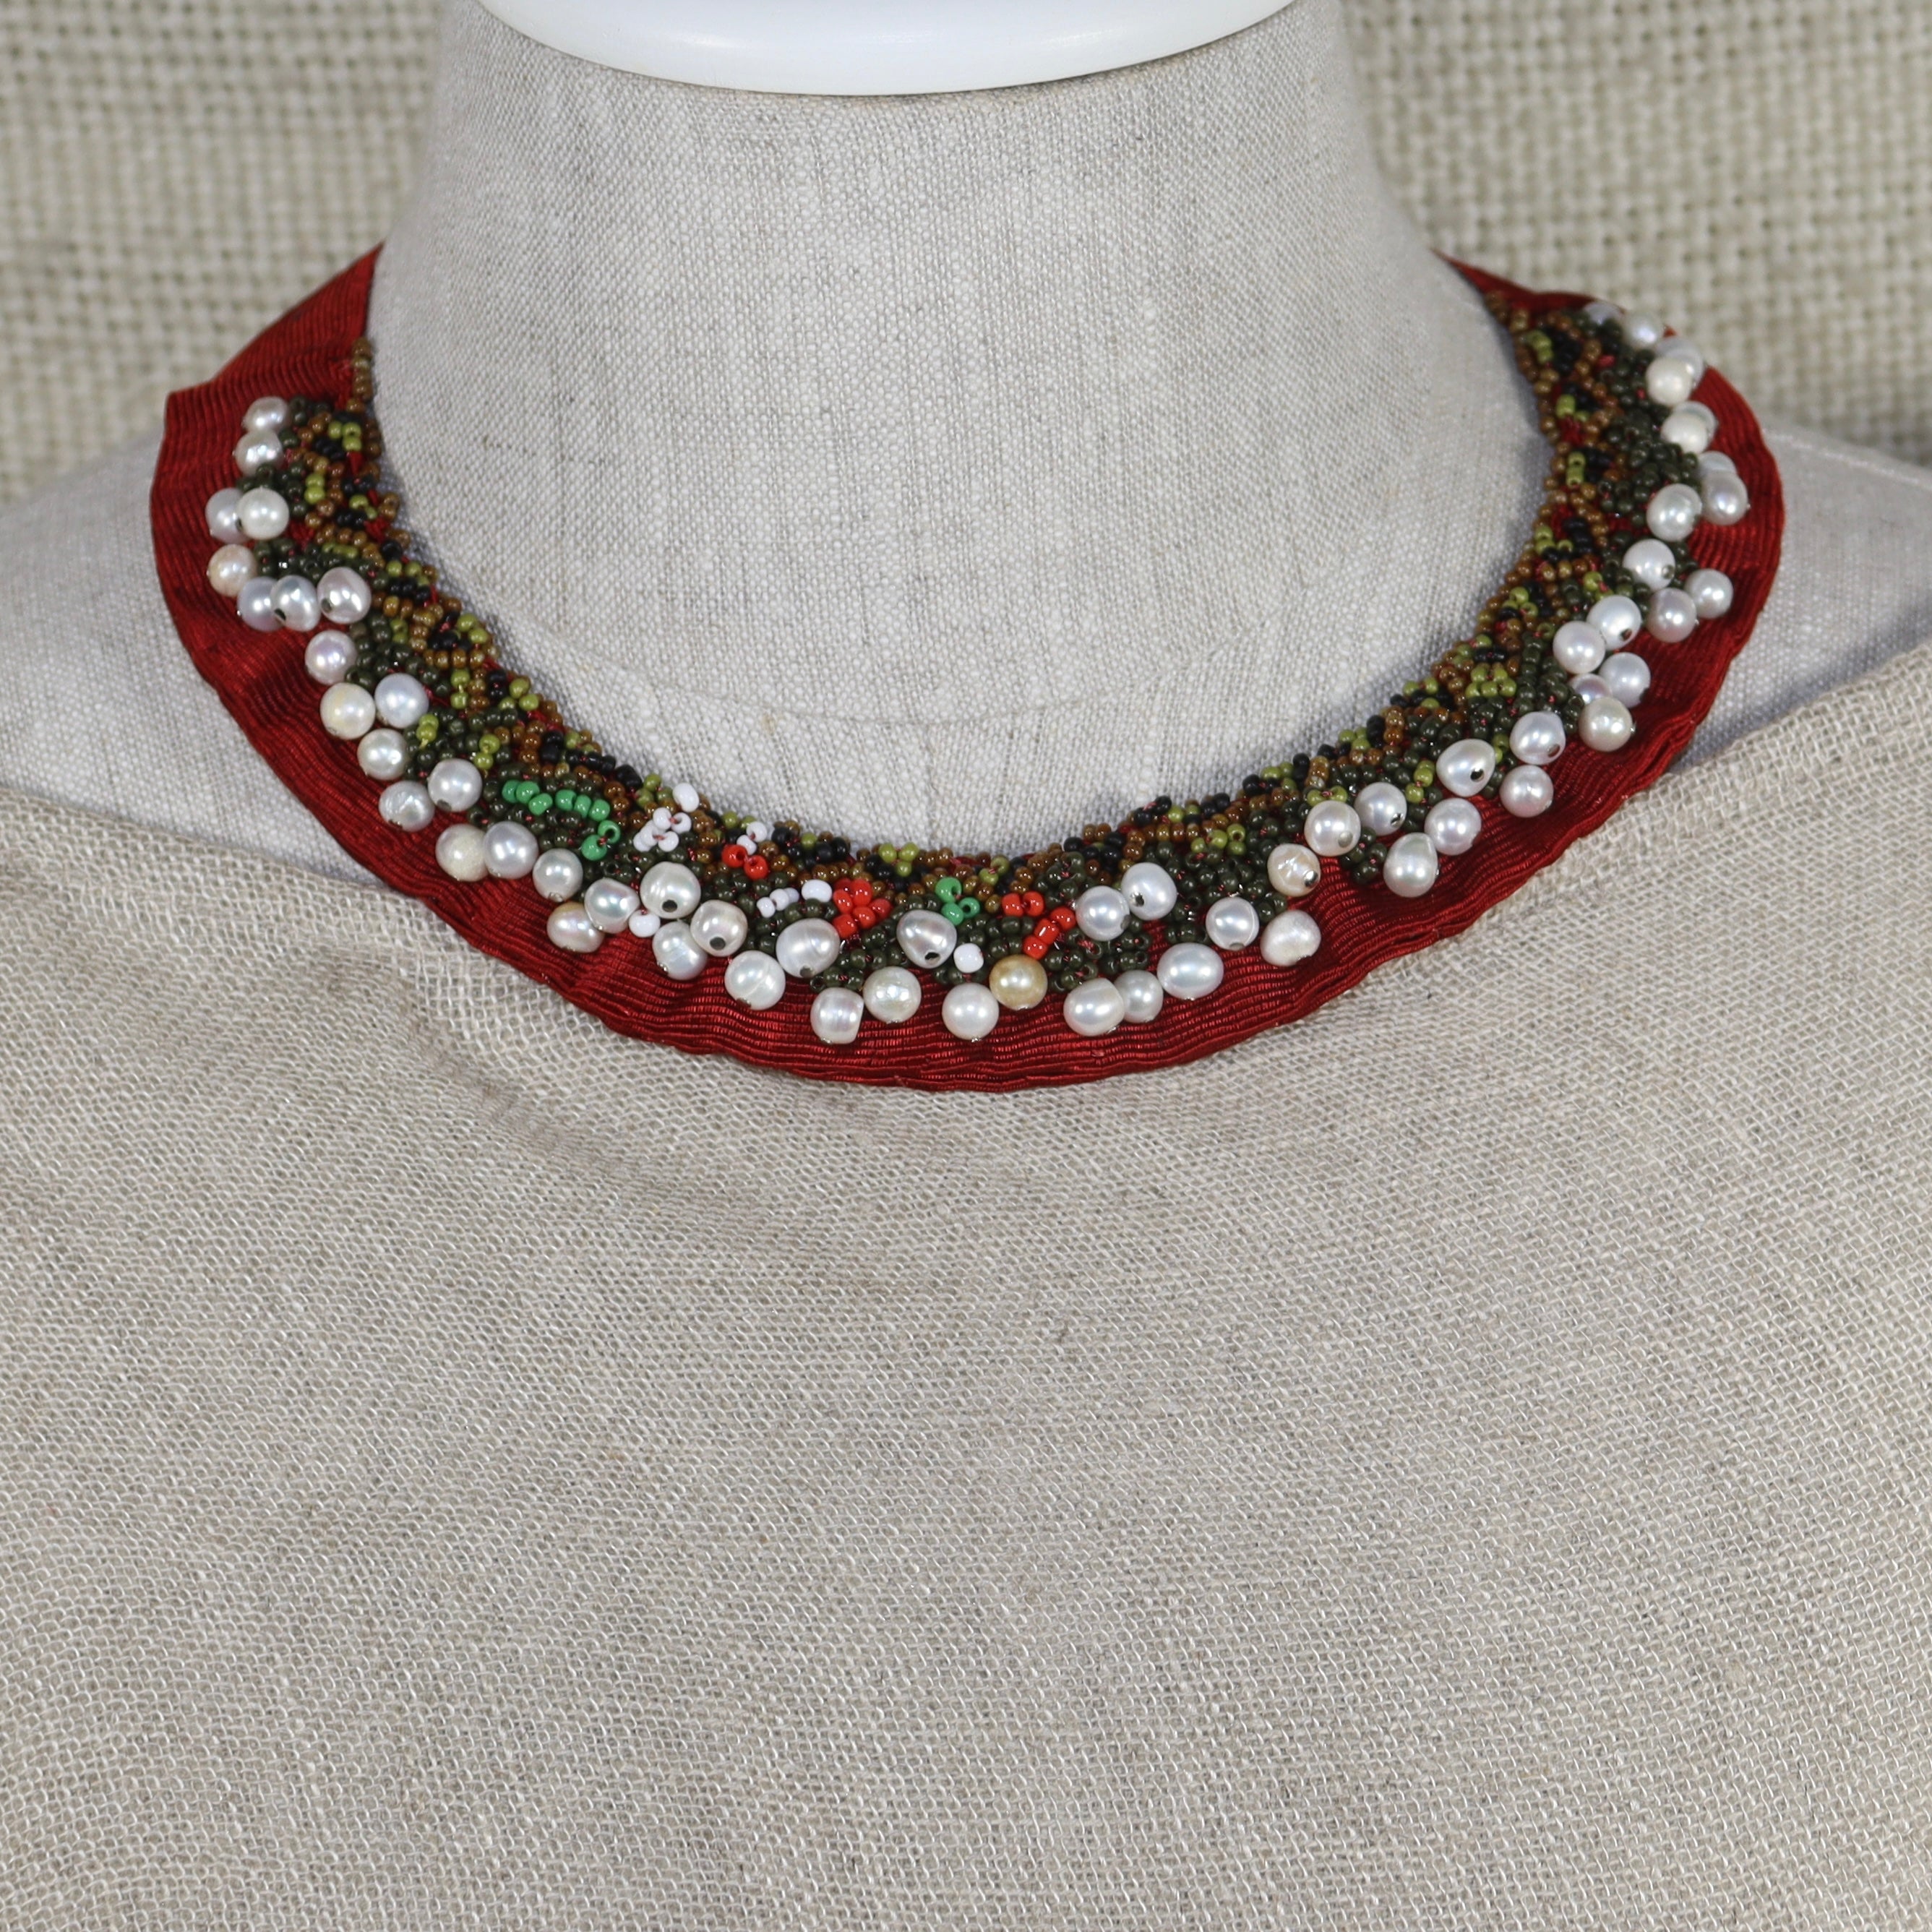 Carmine Red with Beads and Pearls